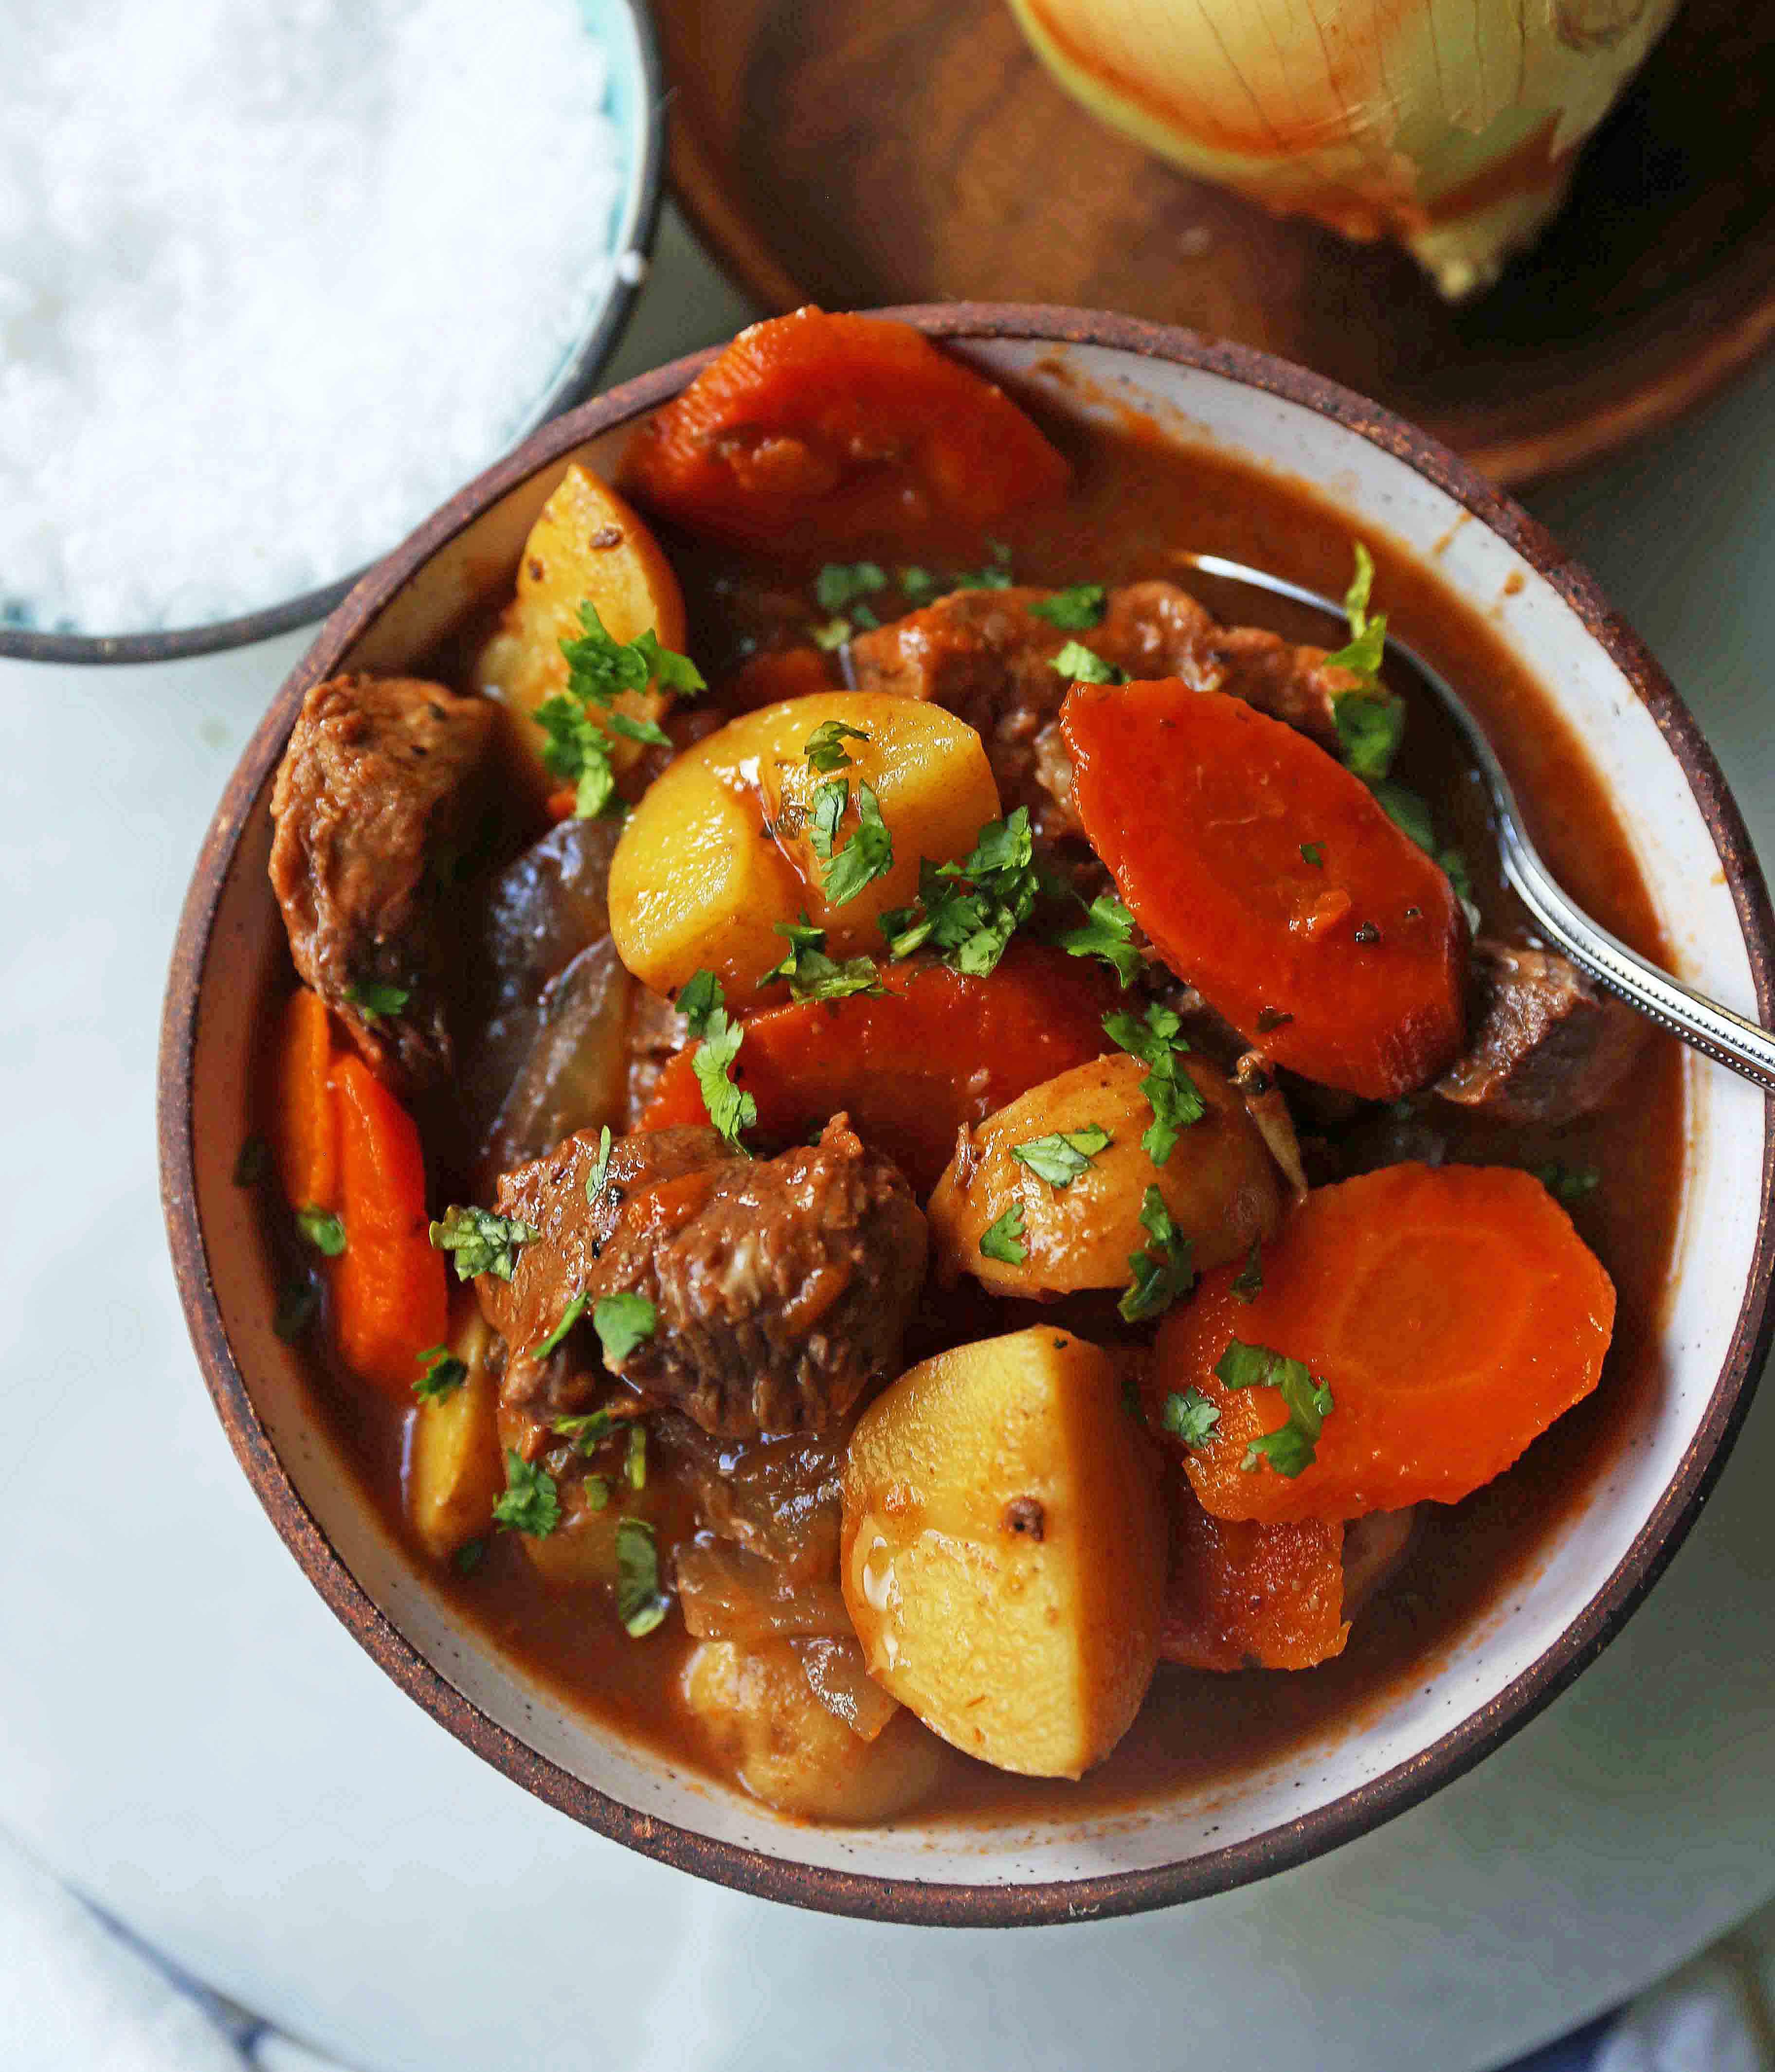 Hearty Beef Stew Recipe is the ultimate comfort food. A healthy beef stew recipe using lean beef, yukon gold potatoes, carrots, onions, in a rich broth. The perfect beef stew recipe! www.modernhoney.com #beefstew #beefstewrecipe #beefsoup #homemadebeefstew #comfortfood #Kroger 